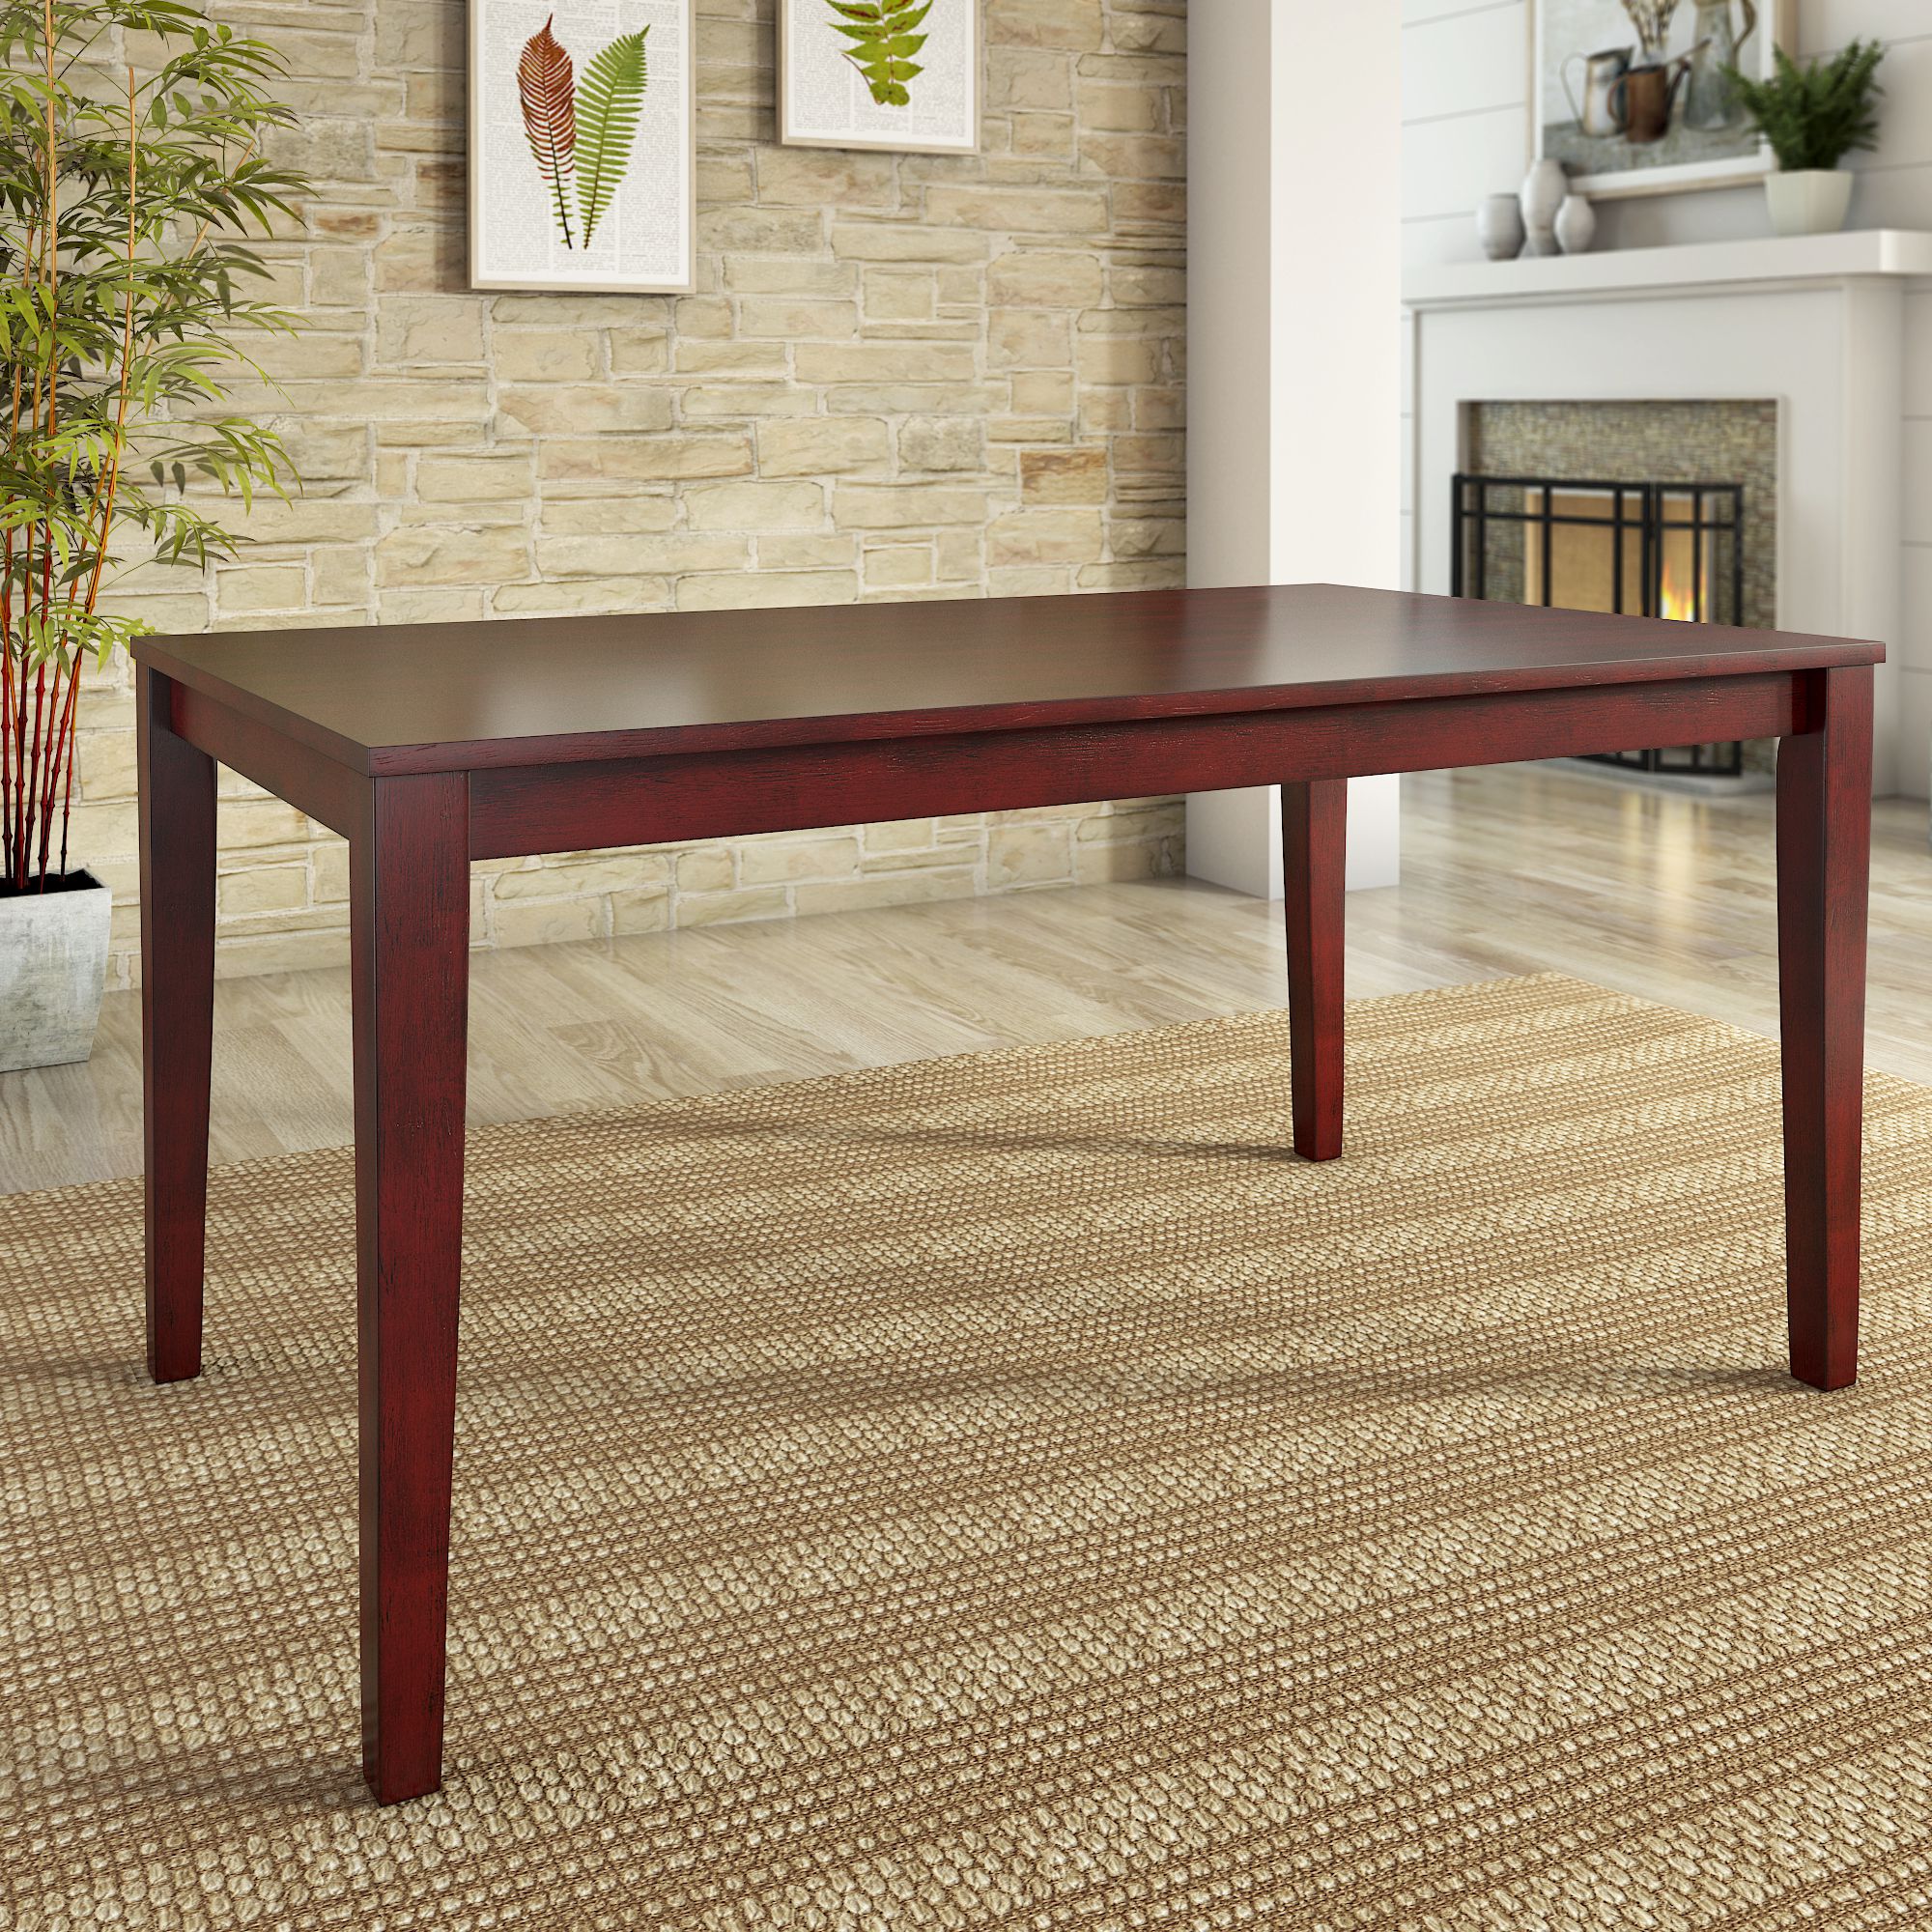 60-inch Rectangular Dining Table